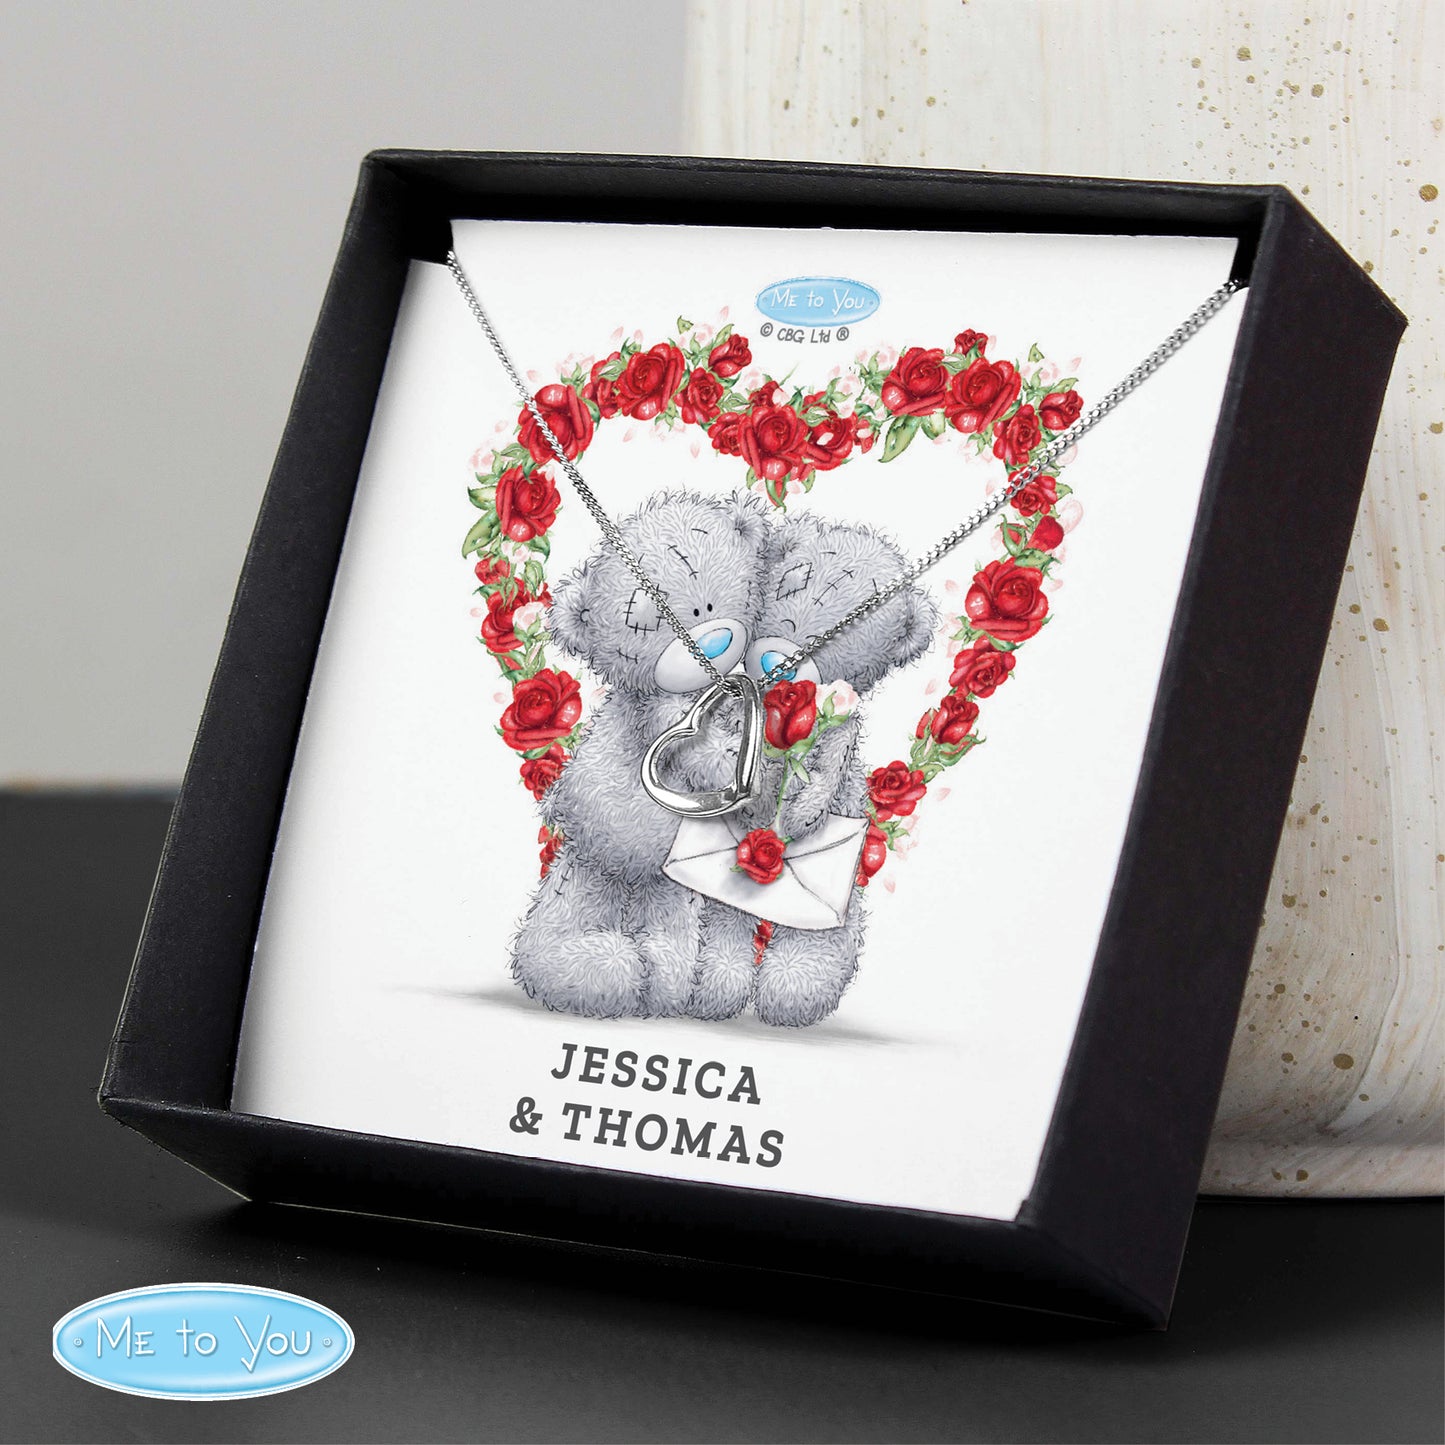 Personalised Me to You Valentine Sentiment Heart Necklace and Box - Personalise It!